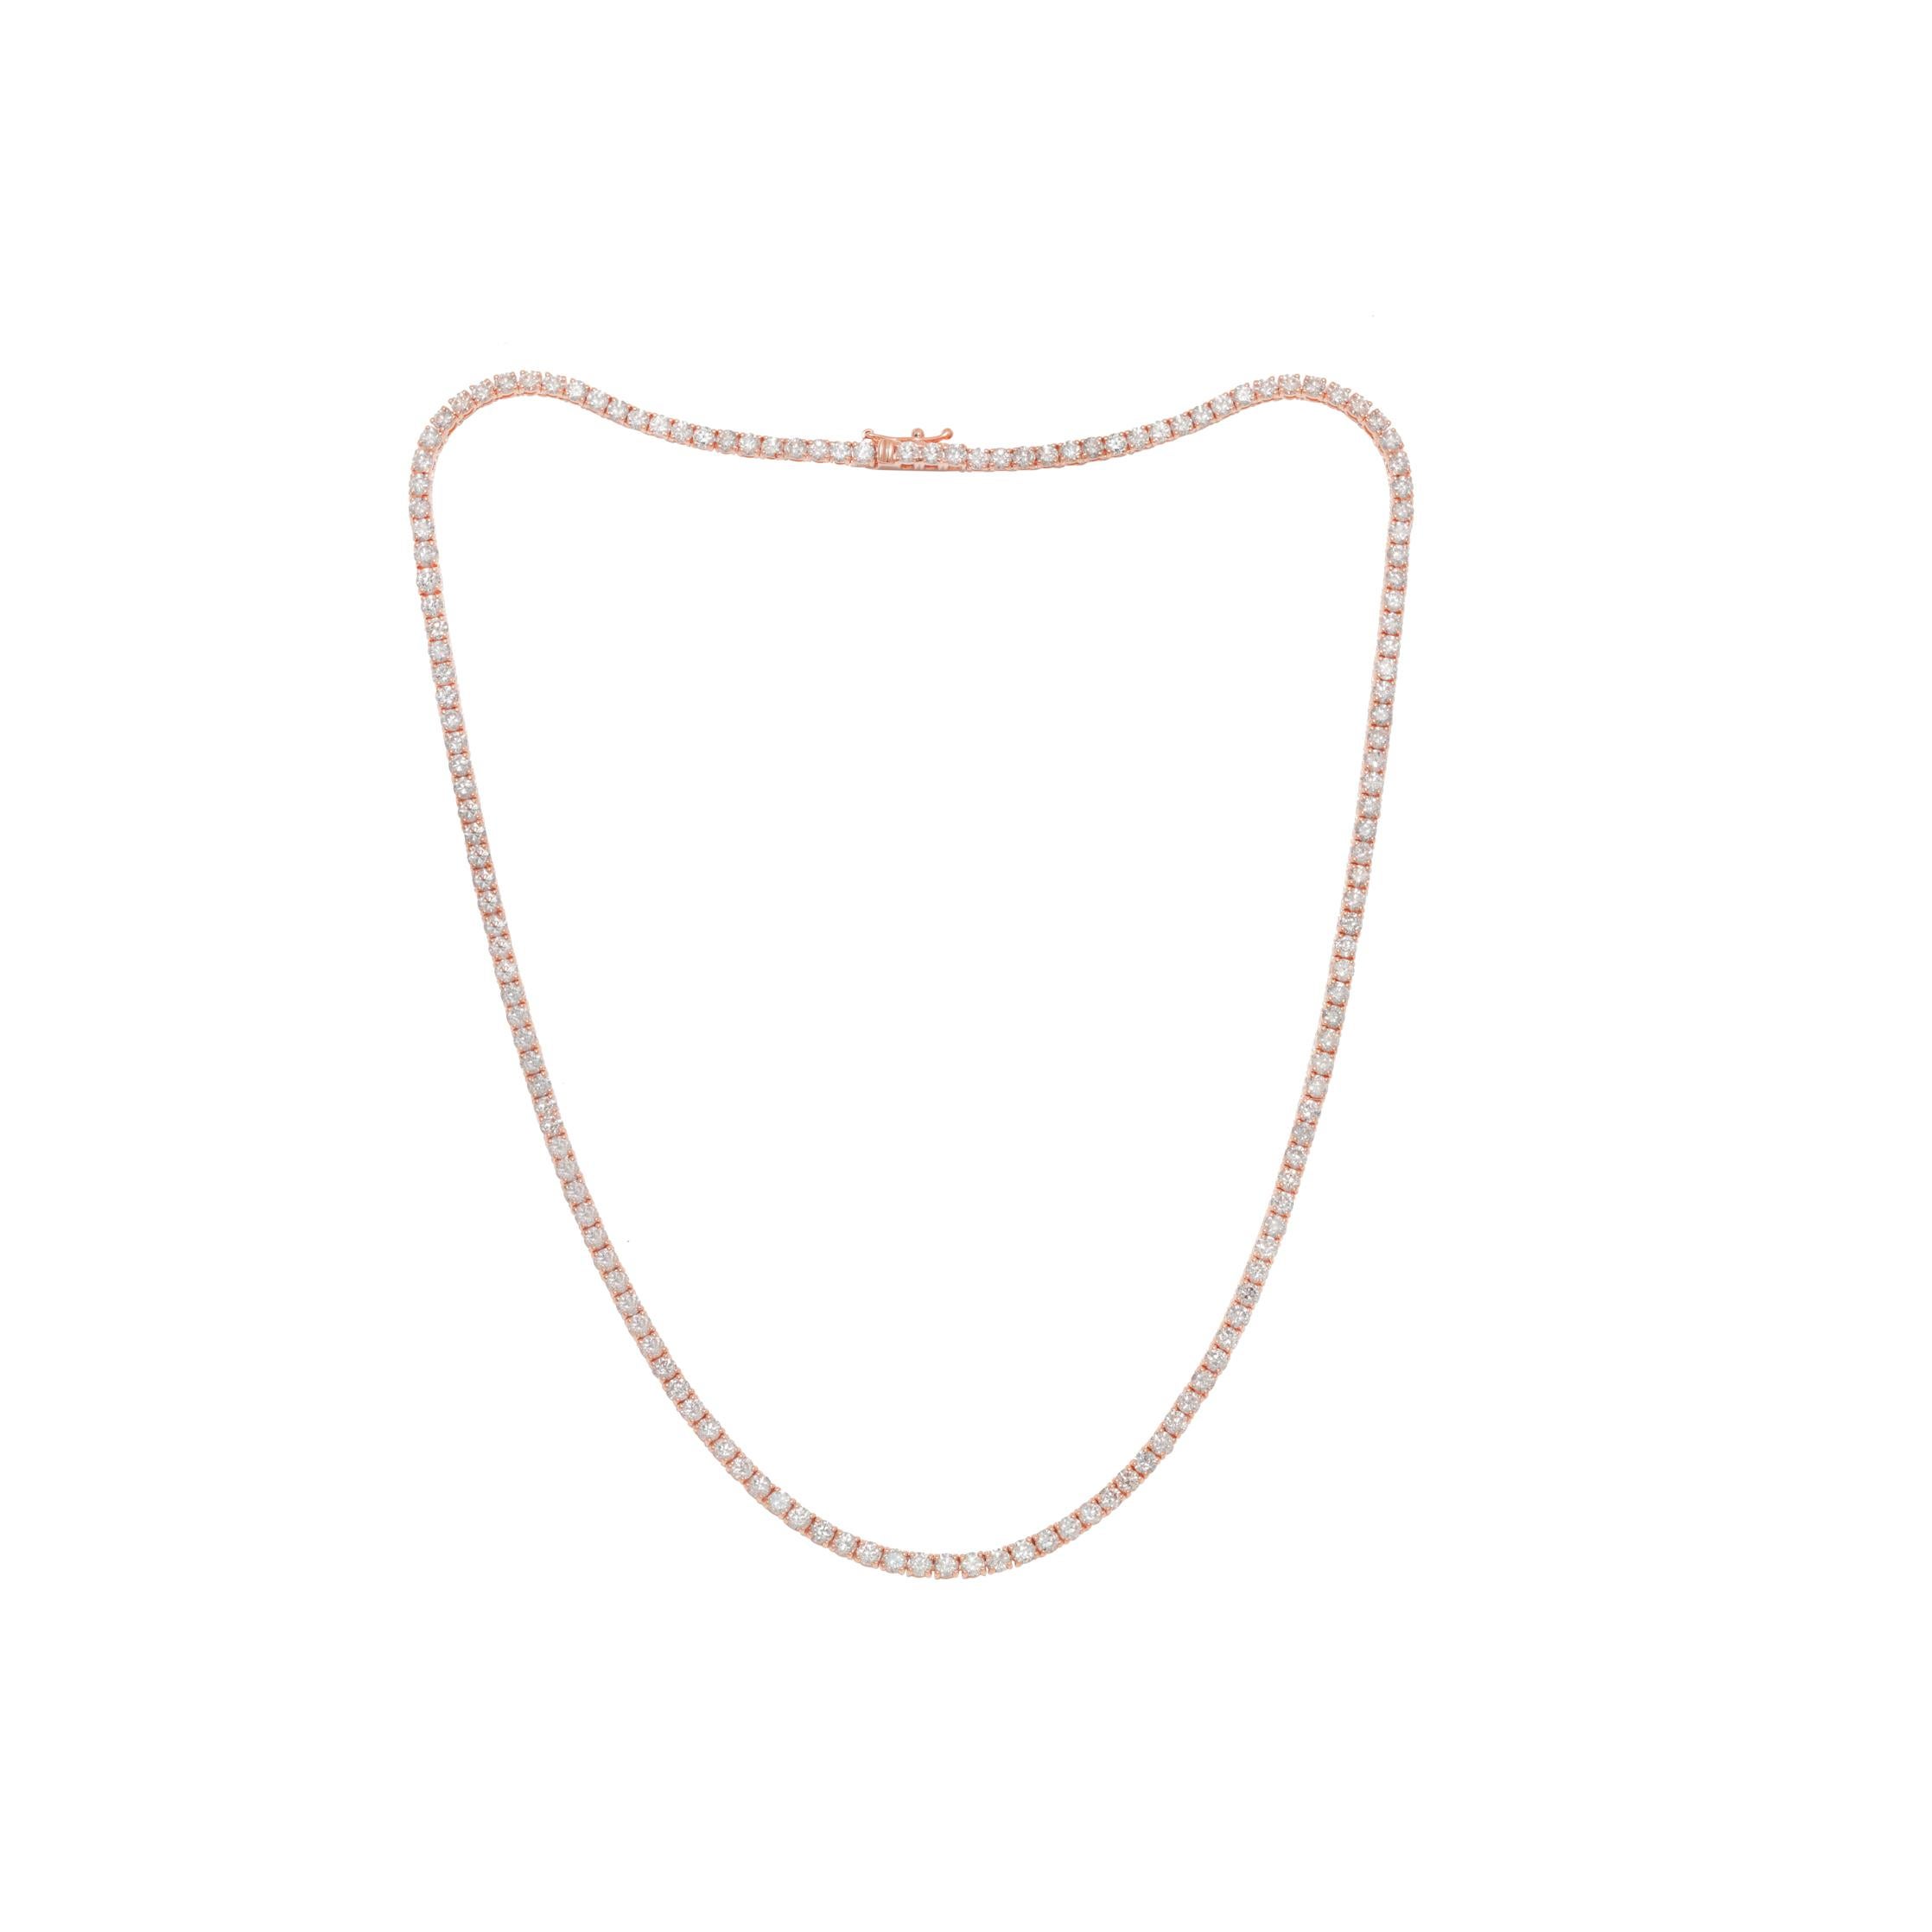 14kt rose gold diamond tennis necklace containing 9.70 cts tw (168 stones) measuring 16